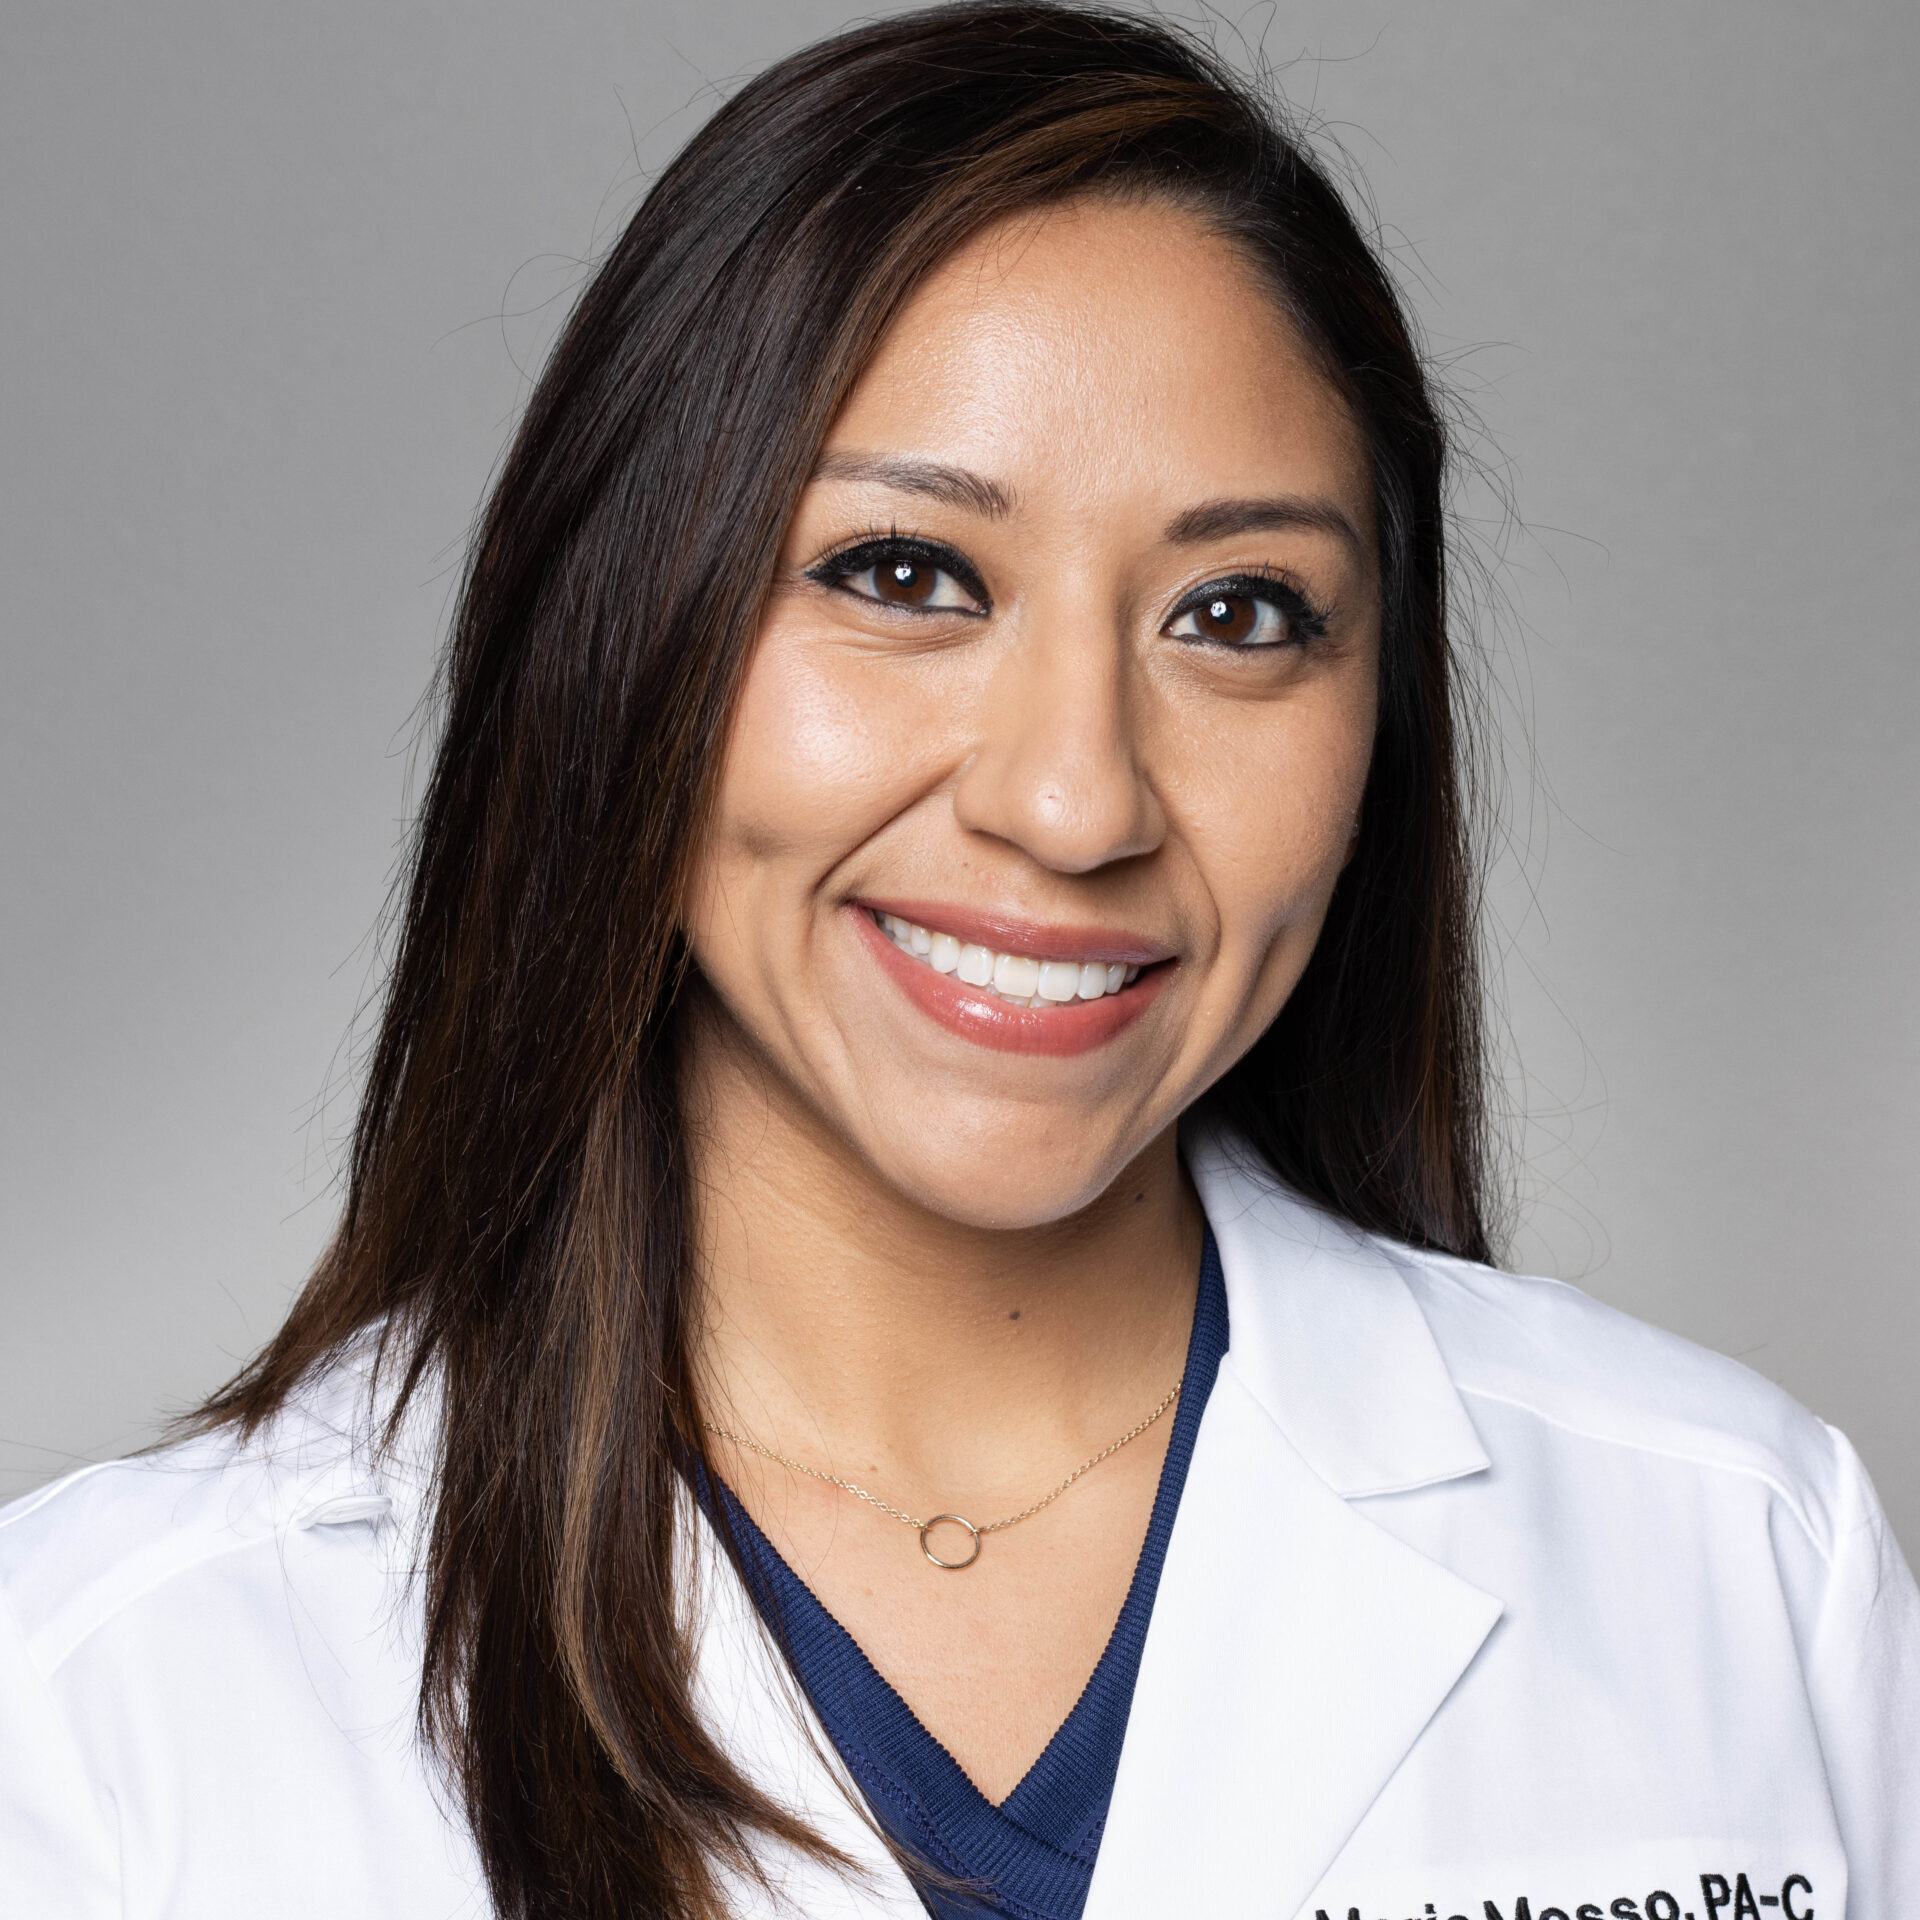 Maria Mosso Certified Physician Assistant at Salience Health - Plano, TX